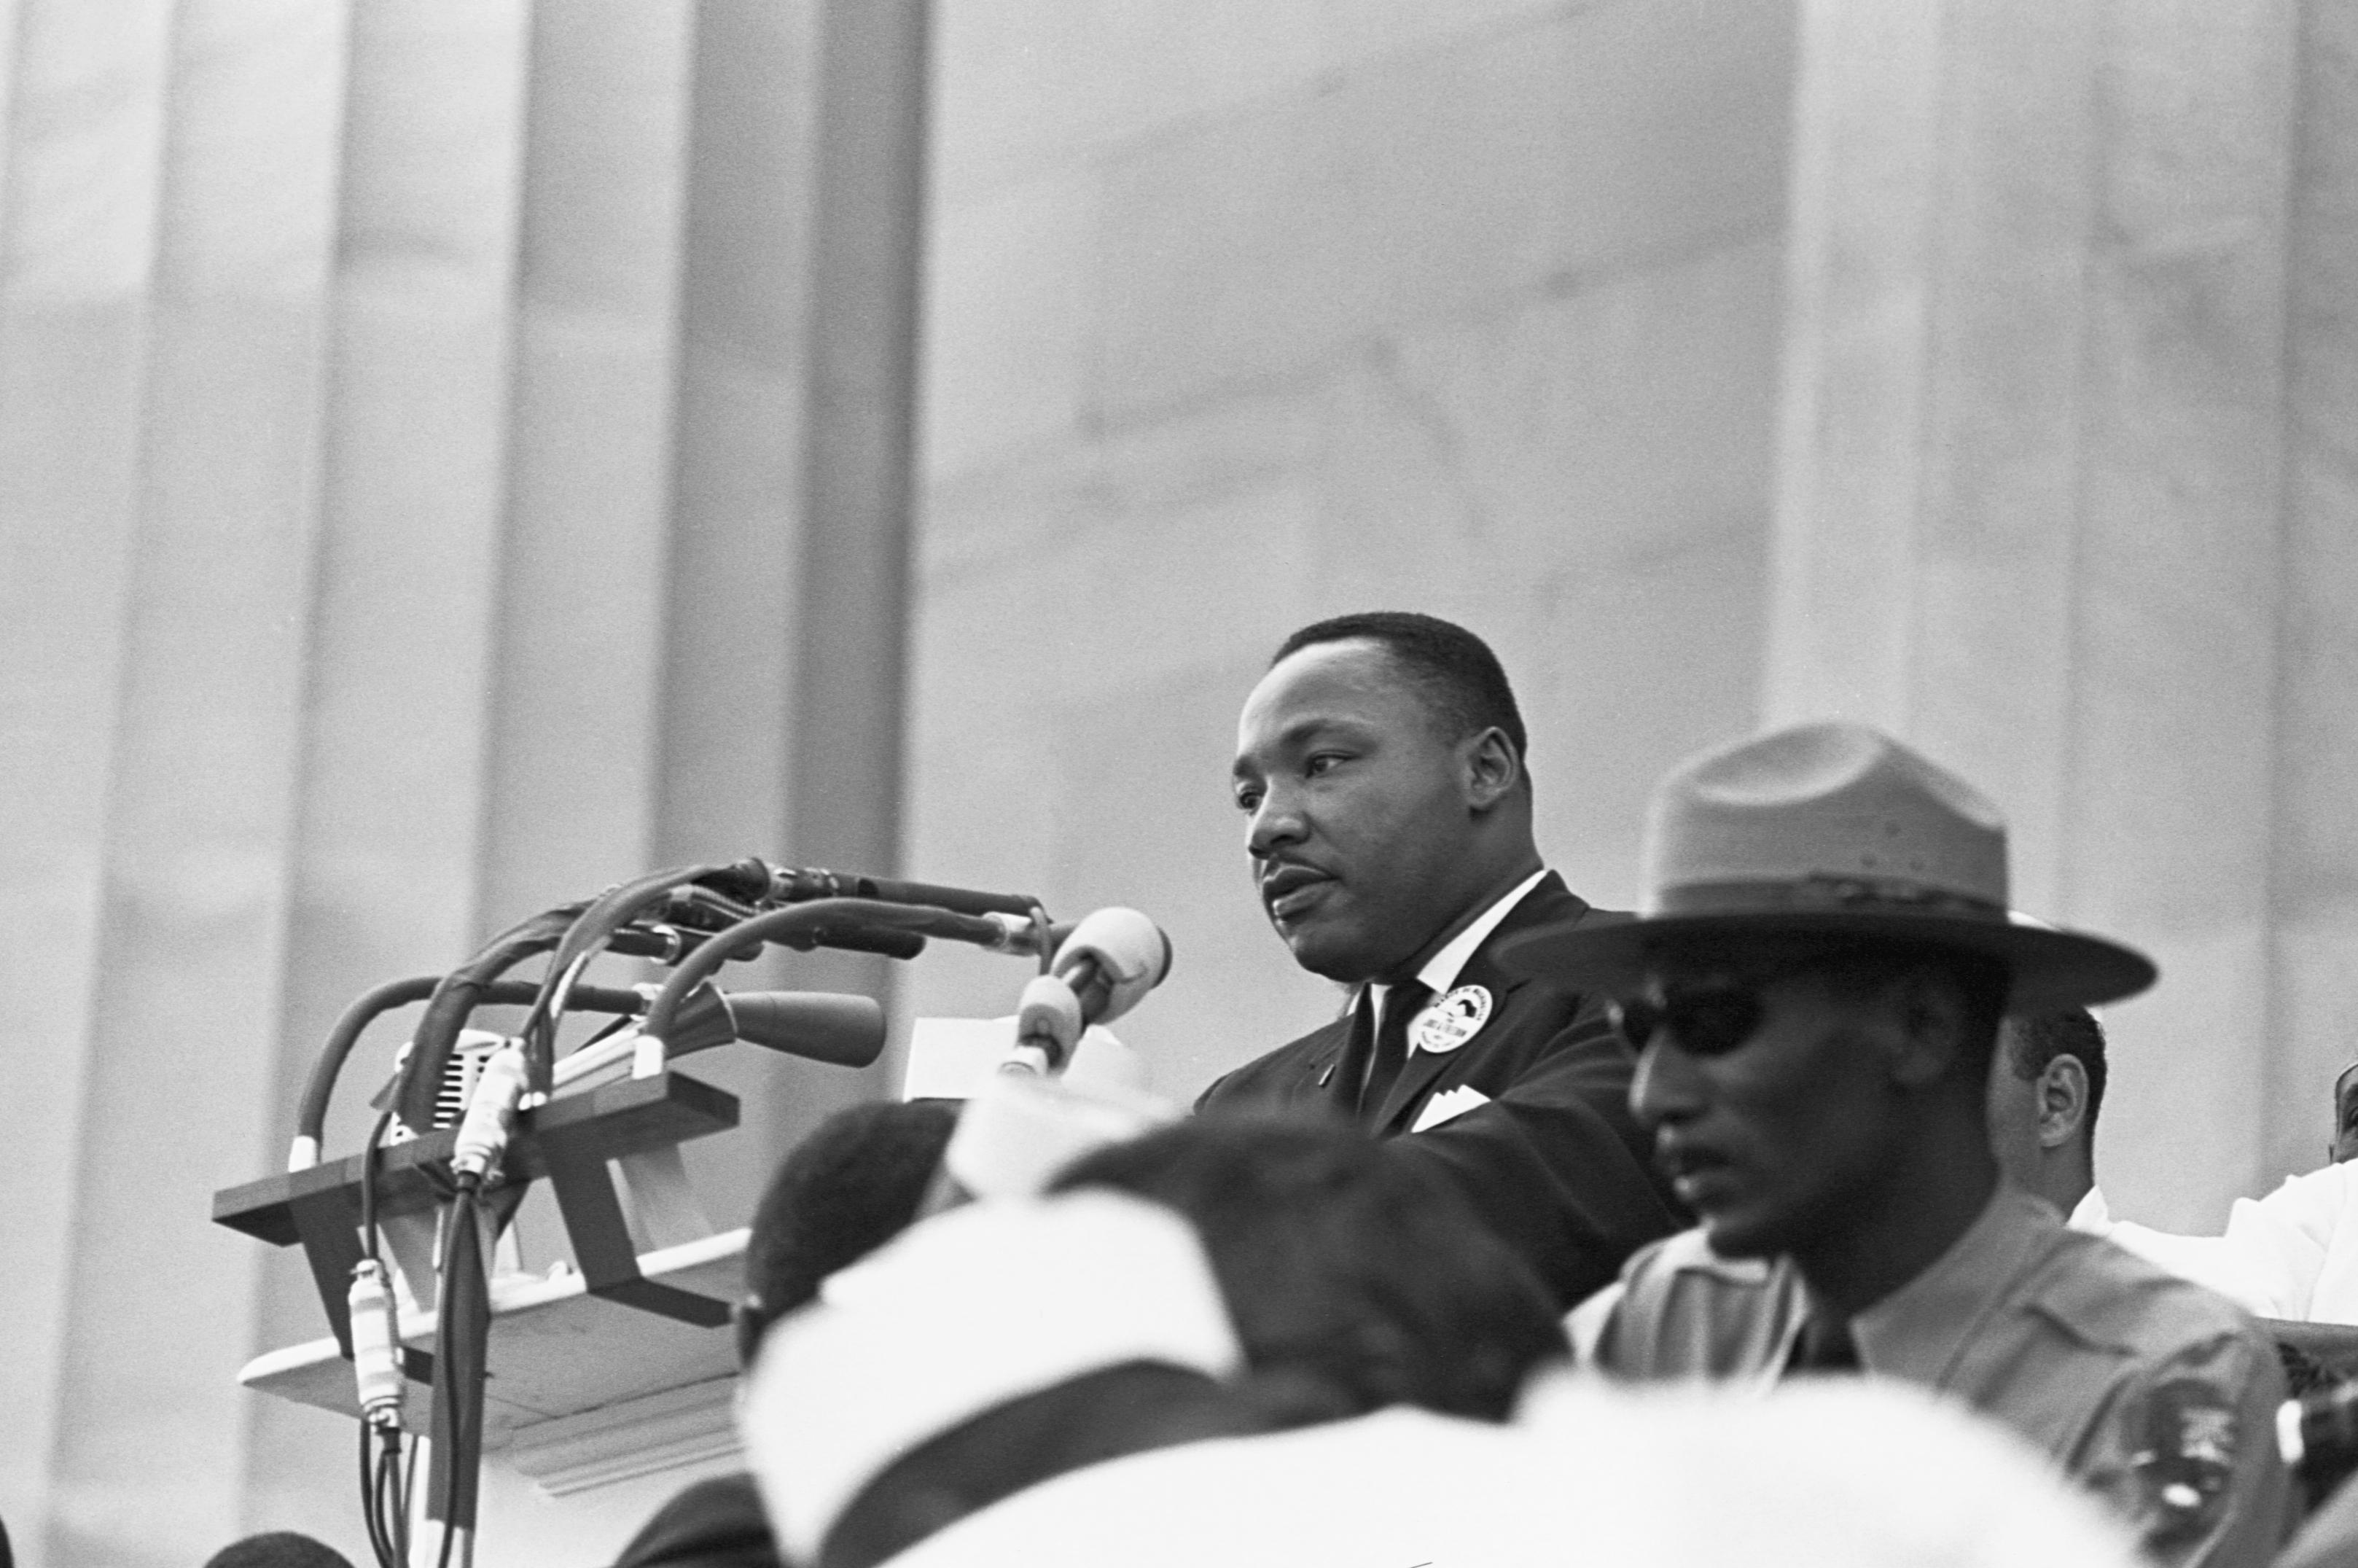 martin luther king jr i have a dream speech analysis essay